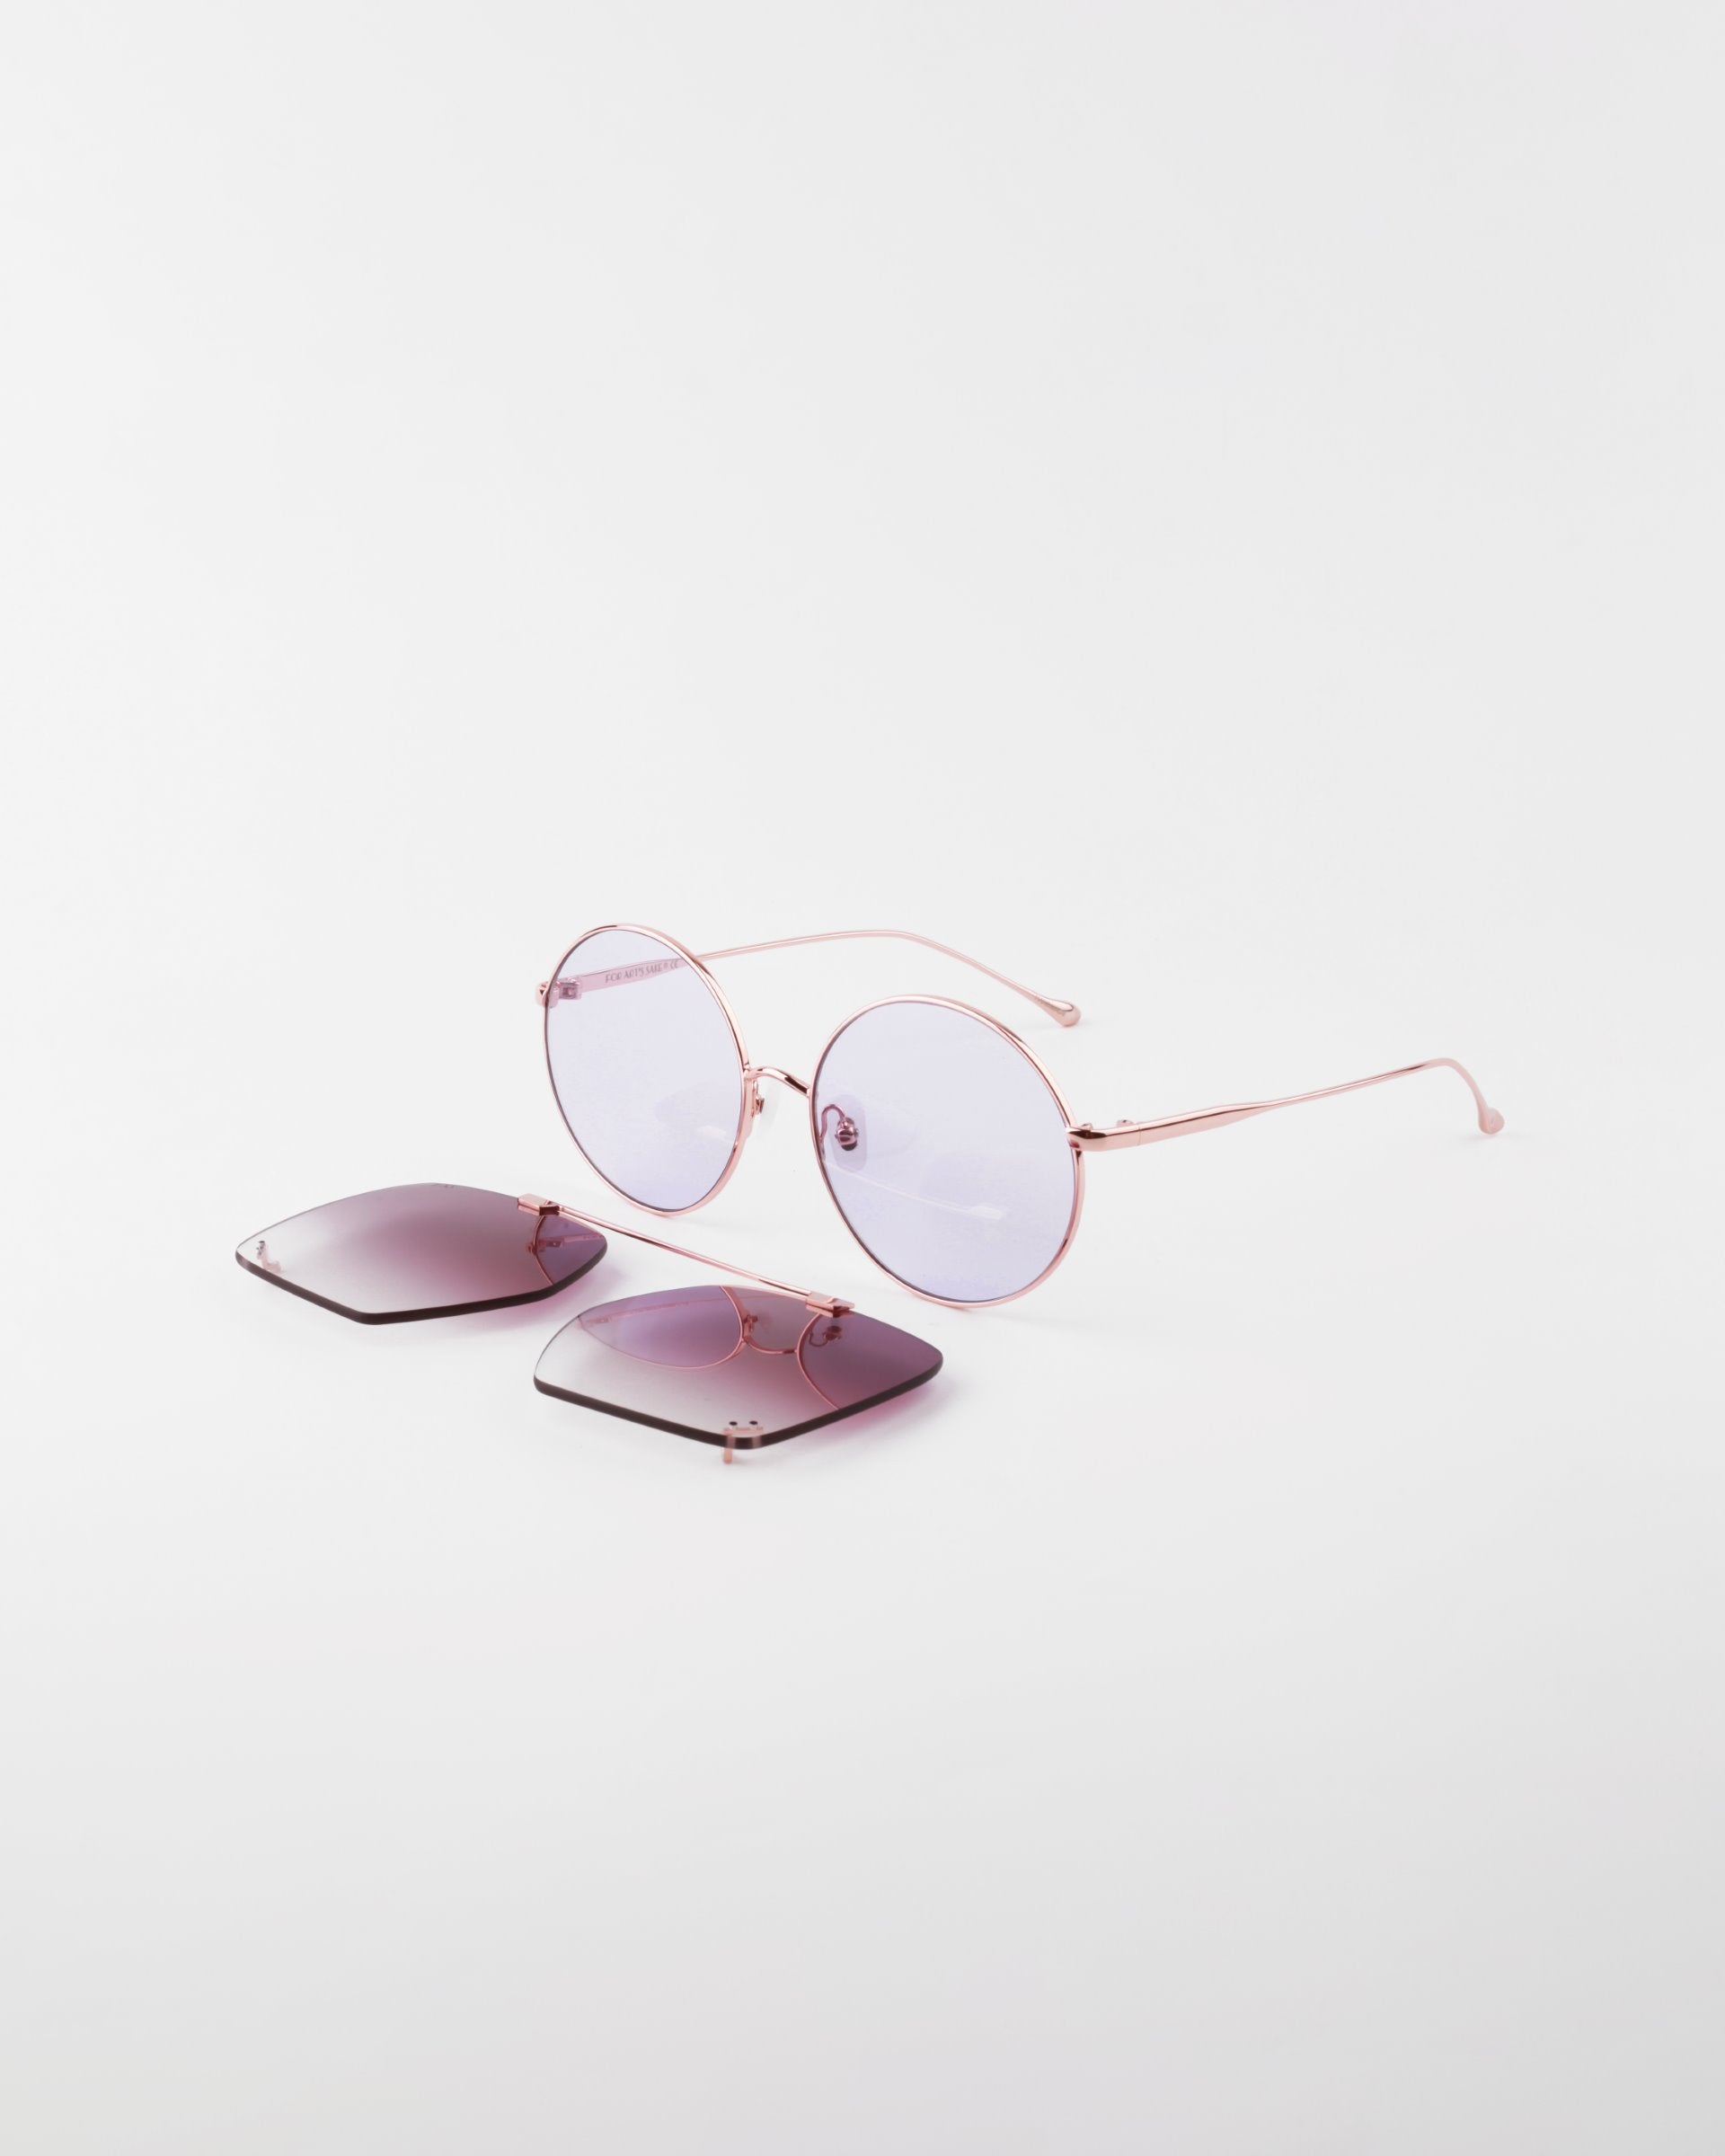 A pair of 18-karat gold-plated, round-frame Last Summer sunglasses by For Art&#39;s Sake® with removable purple lenses sit on a white surface. One set of lens is detached and laid flat nearby, showcasing the sunglasses&#39; interchangeable lens feature and UVA &amp; UVB-protected design.